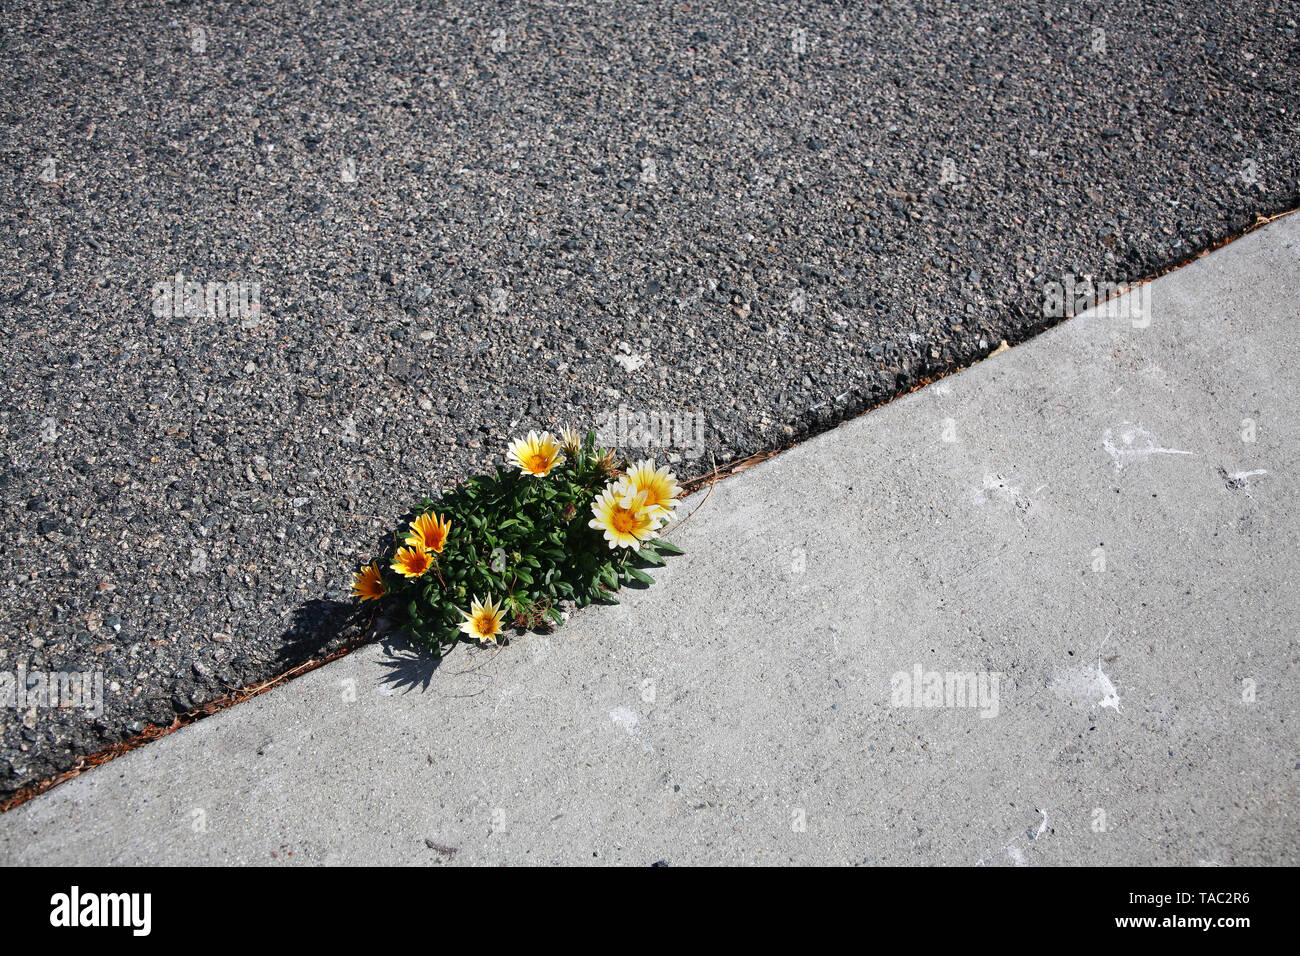 flowers growing in pavement crack Stock Photo